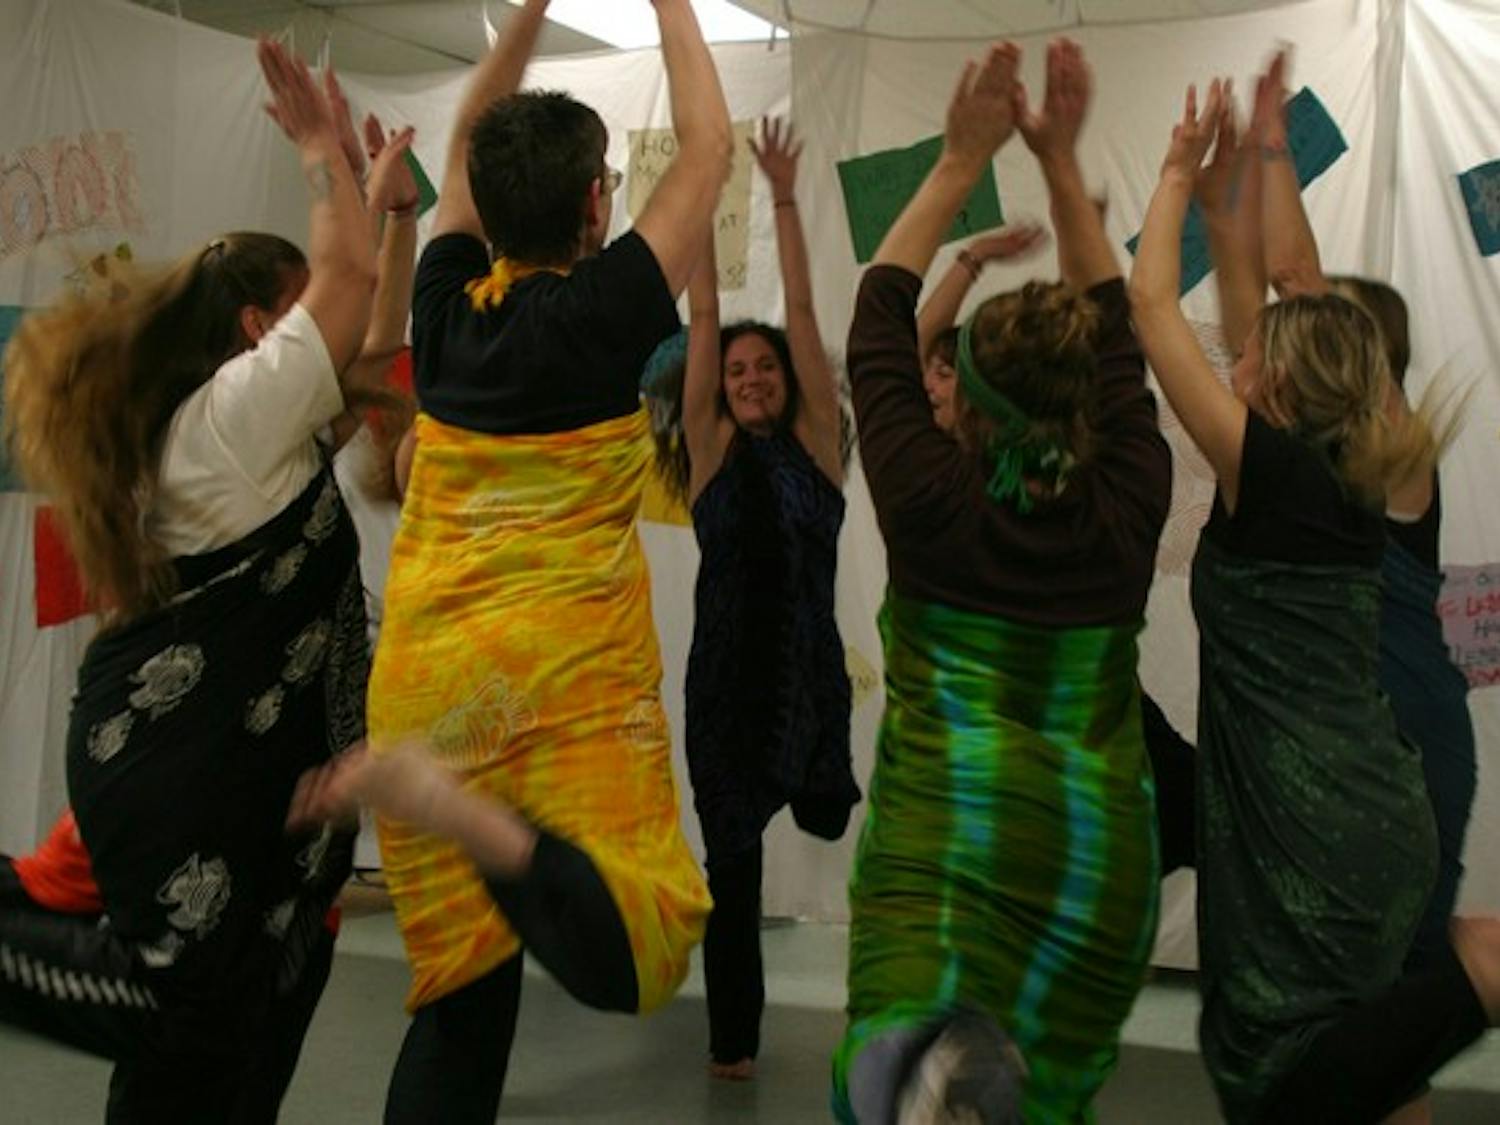 Women prisoners perform at the Southeast State Correctional Facility in Windsor, Vt., last year.